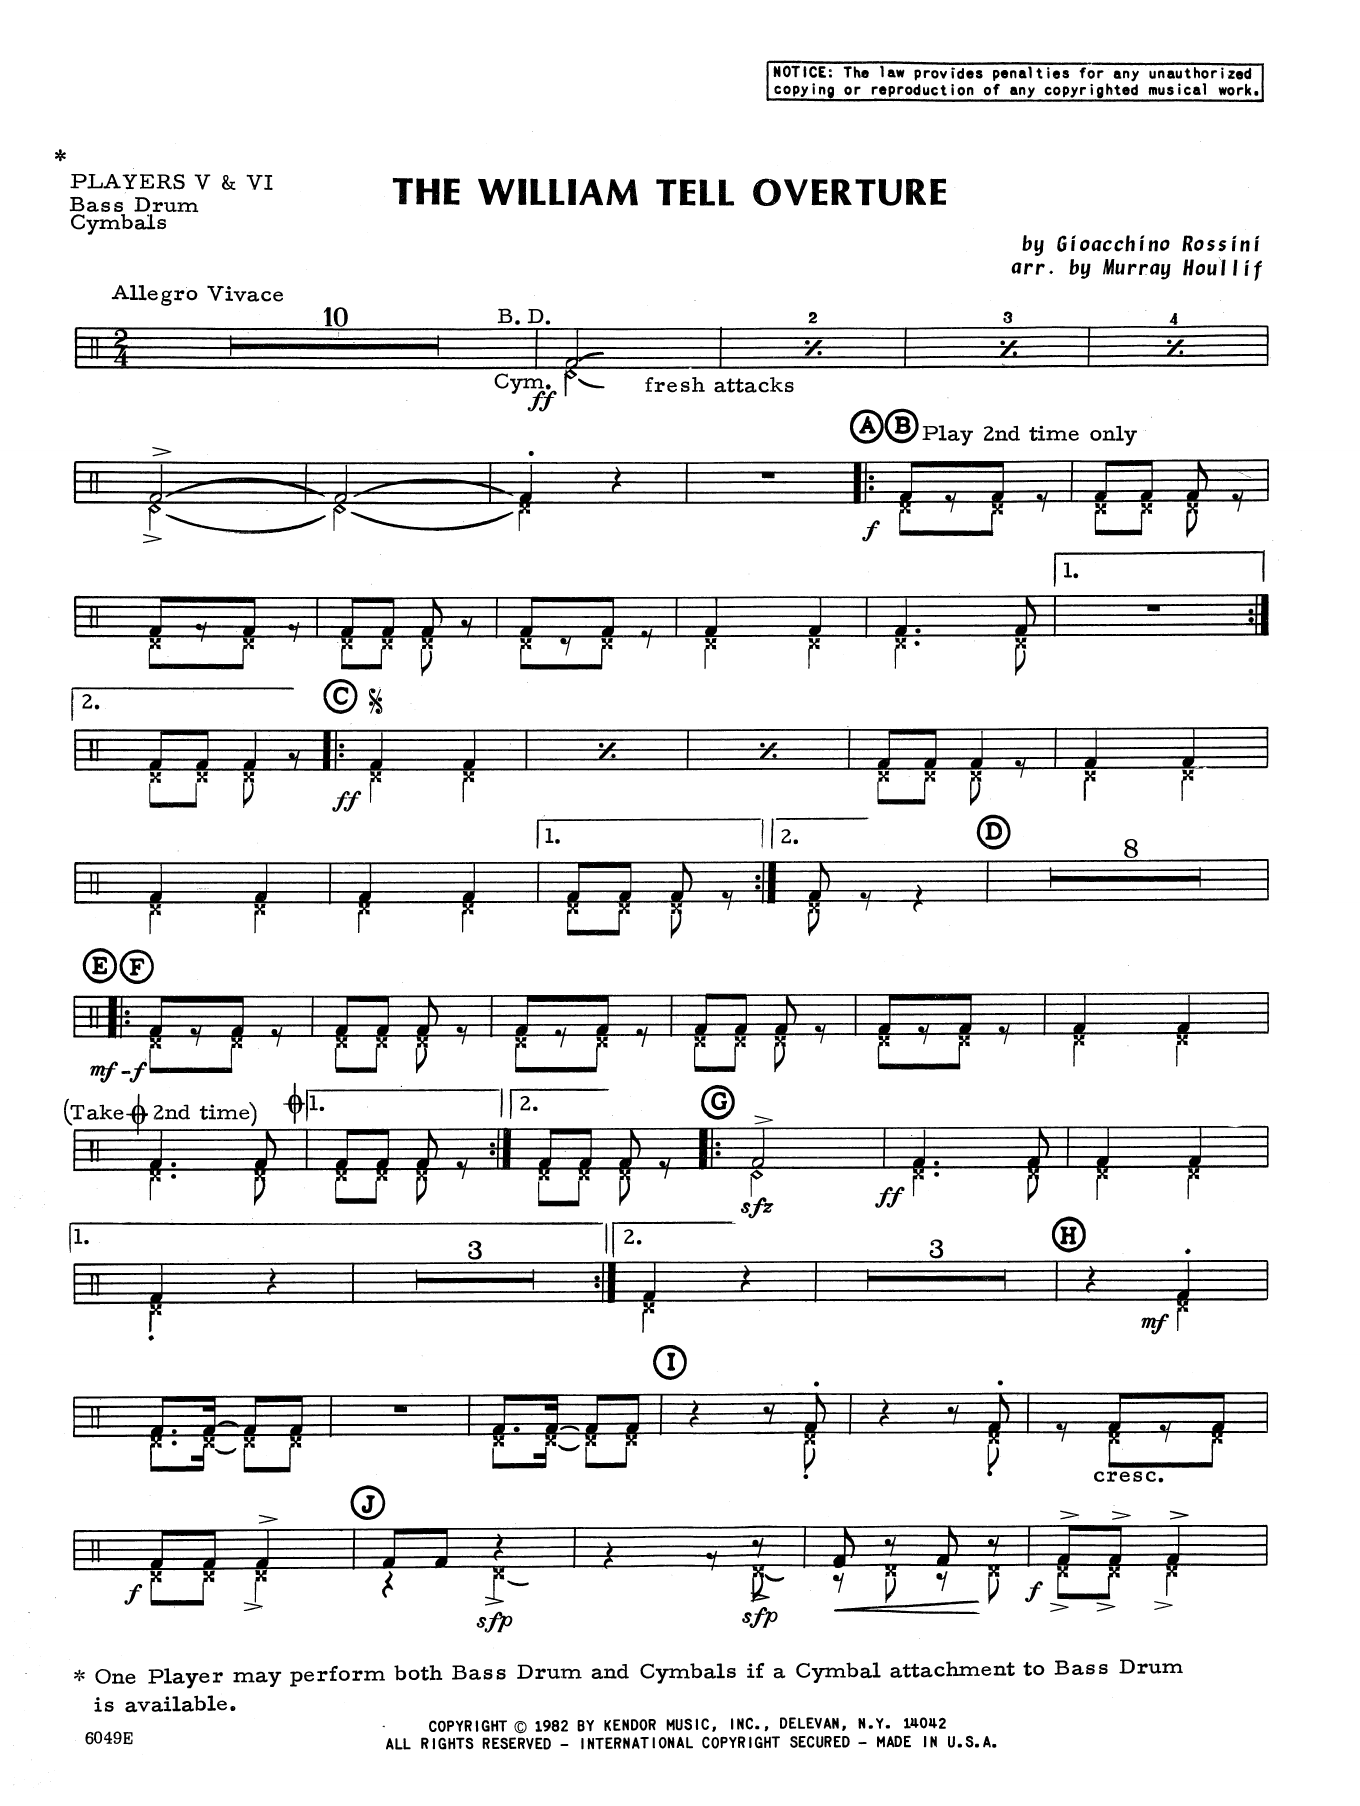 Download Murray Houllif The William Tell Overture - Percussion Sheet Music